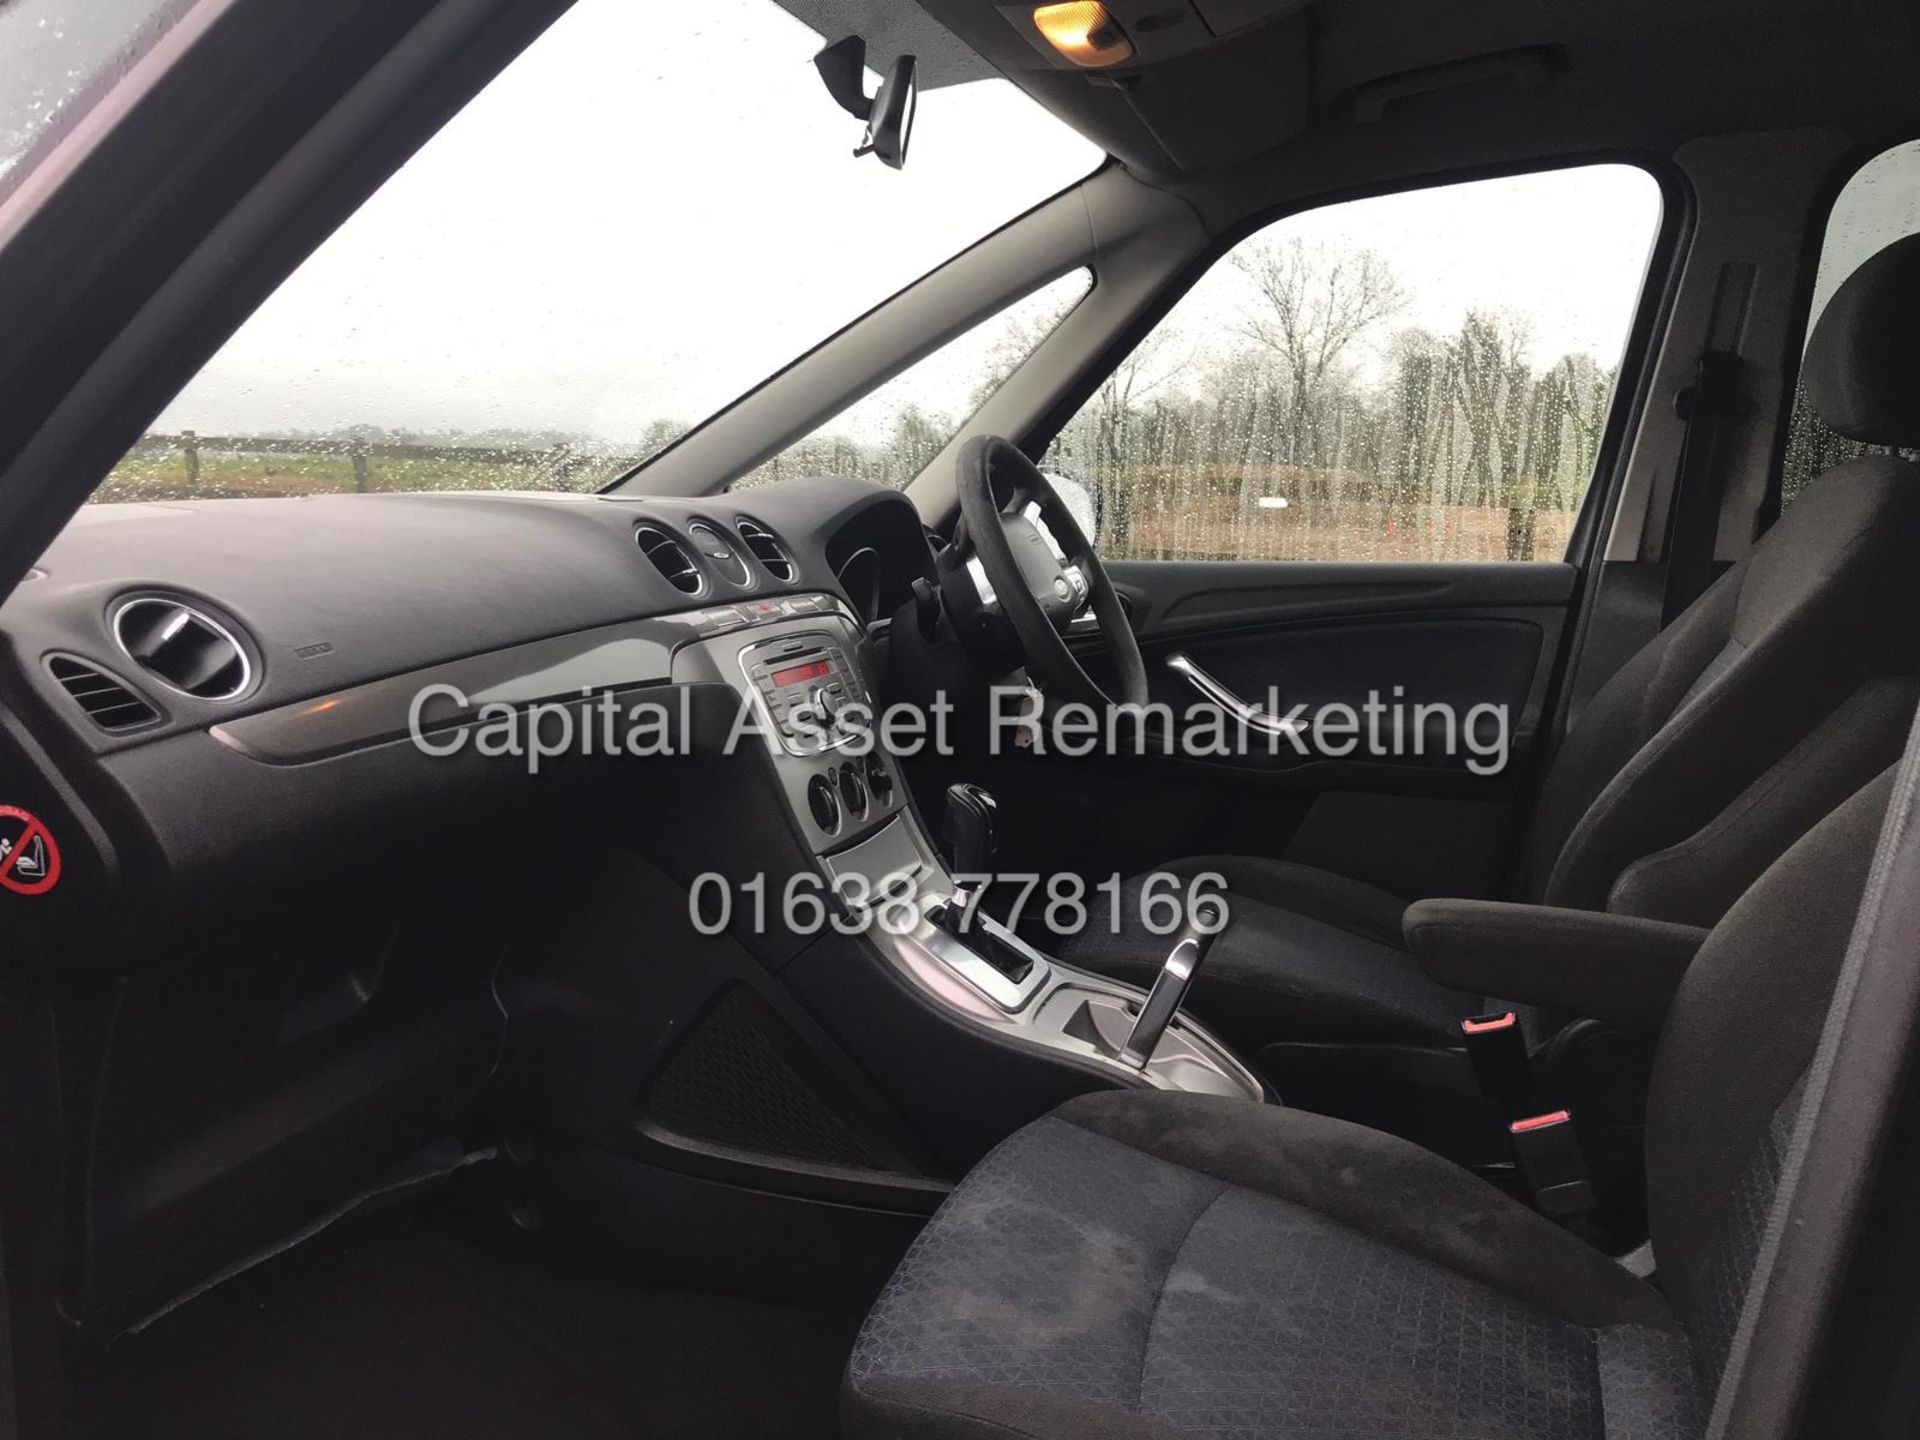 (ON SALE) FORD GALAXY 2.0TDCI "EDGE" 7 SEATER - 08 REG - AIR CON - 1 PREVIOUS OWNER - BLACK - Image 11 of 14